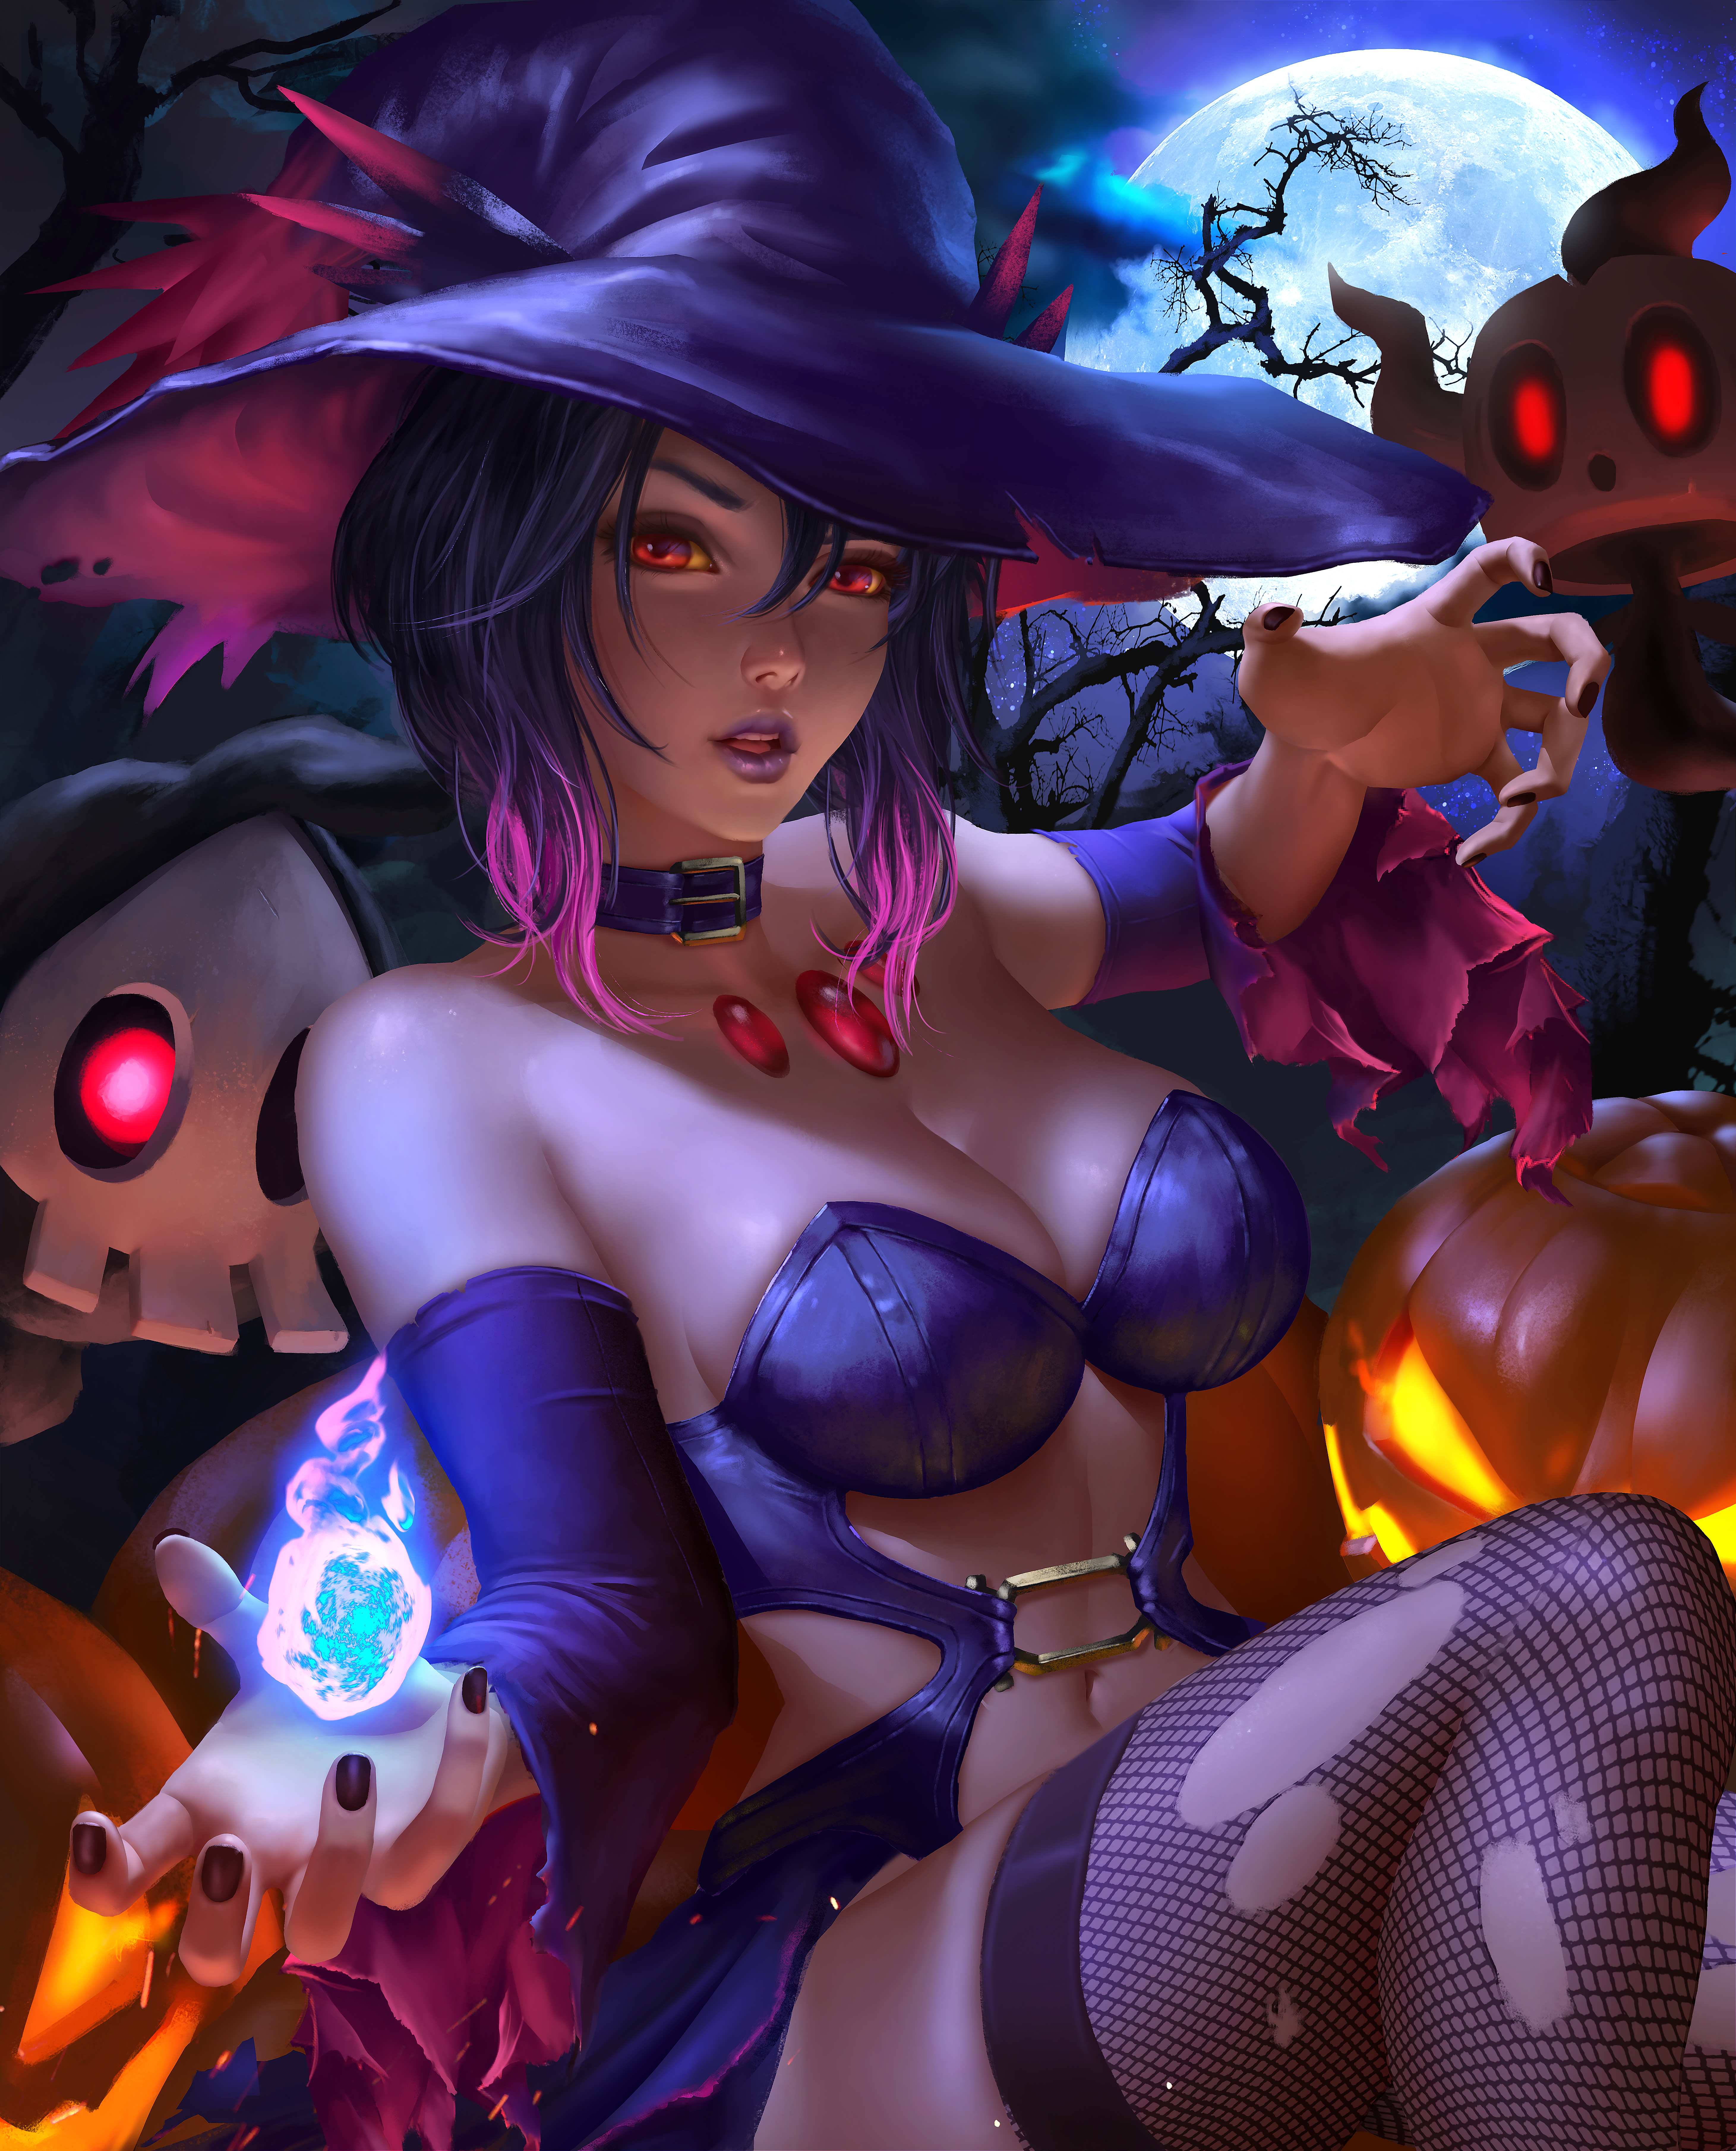 General 5844x7239 Pokémon video games video game girls fan art witch fantasy girl witch hat red eyes looking at viewer lingerie cleavage detached sleeves stockings fishnet stockings ghost pumpkin Halloween moonlight fantasy art magic portrait artwork drawing digital art curvy outdoors Logan Cure necklace